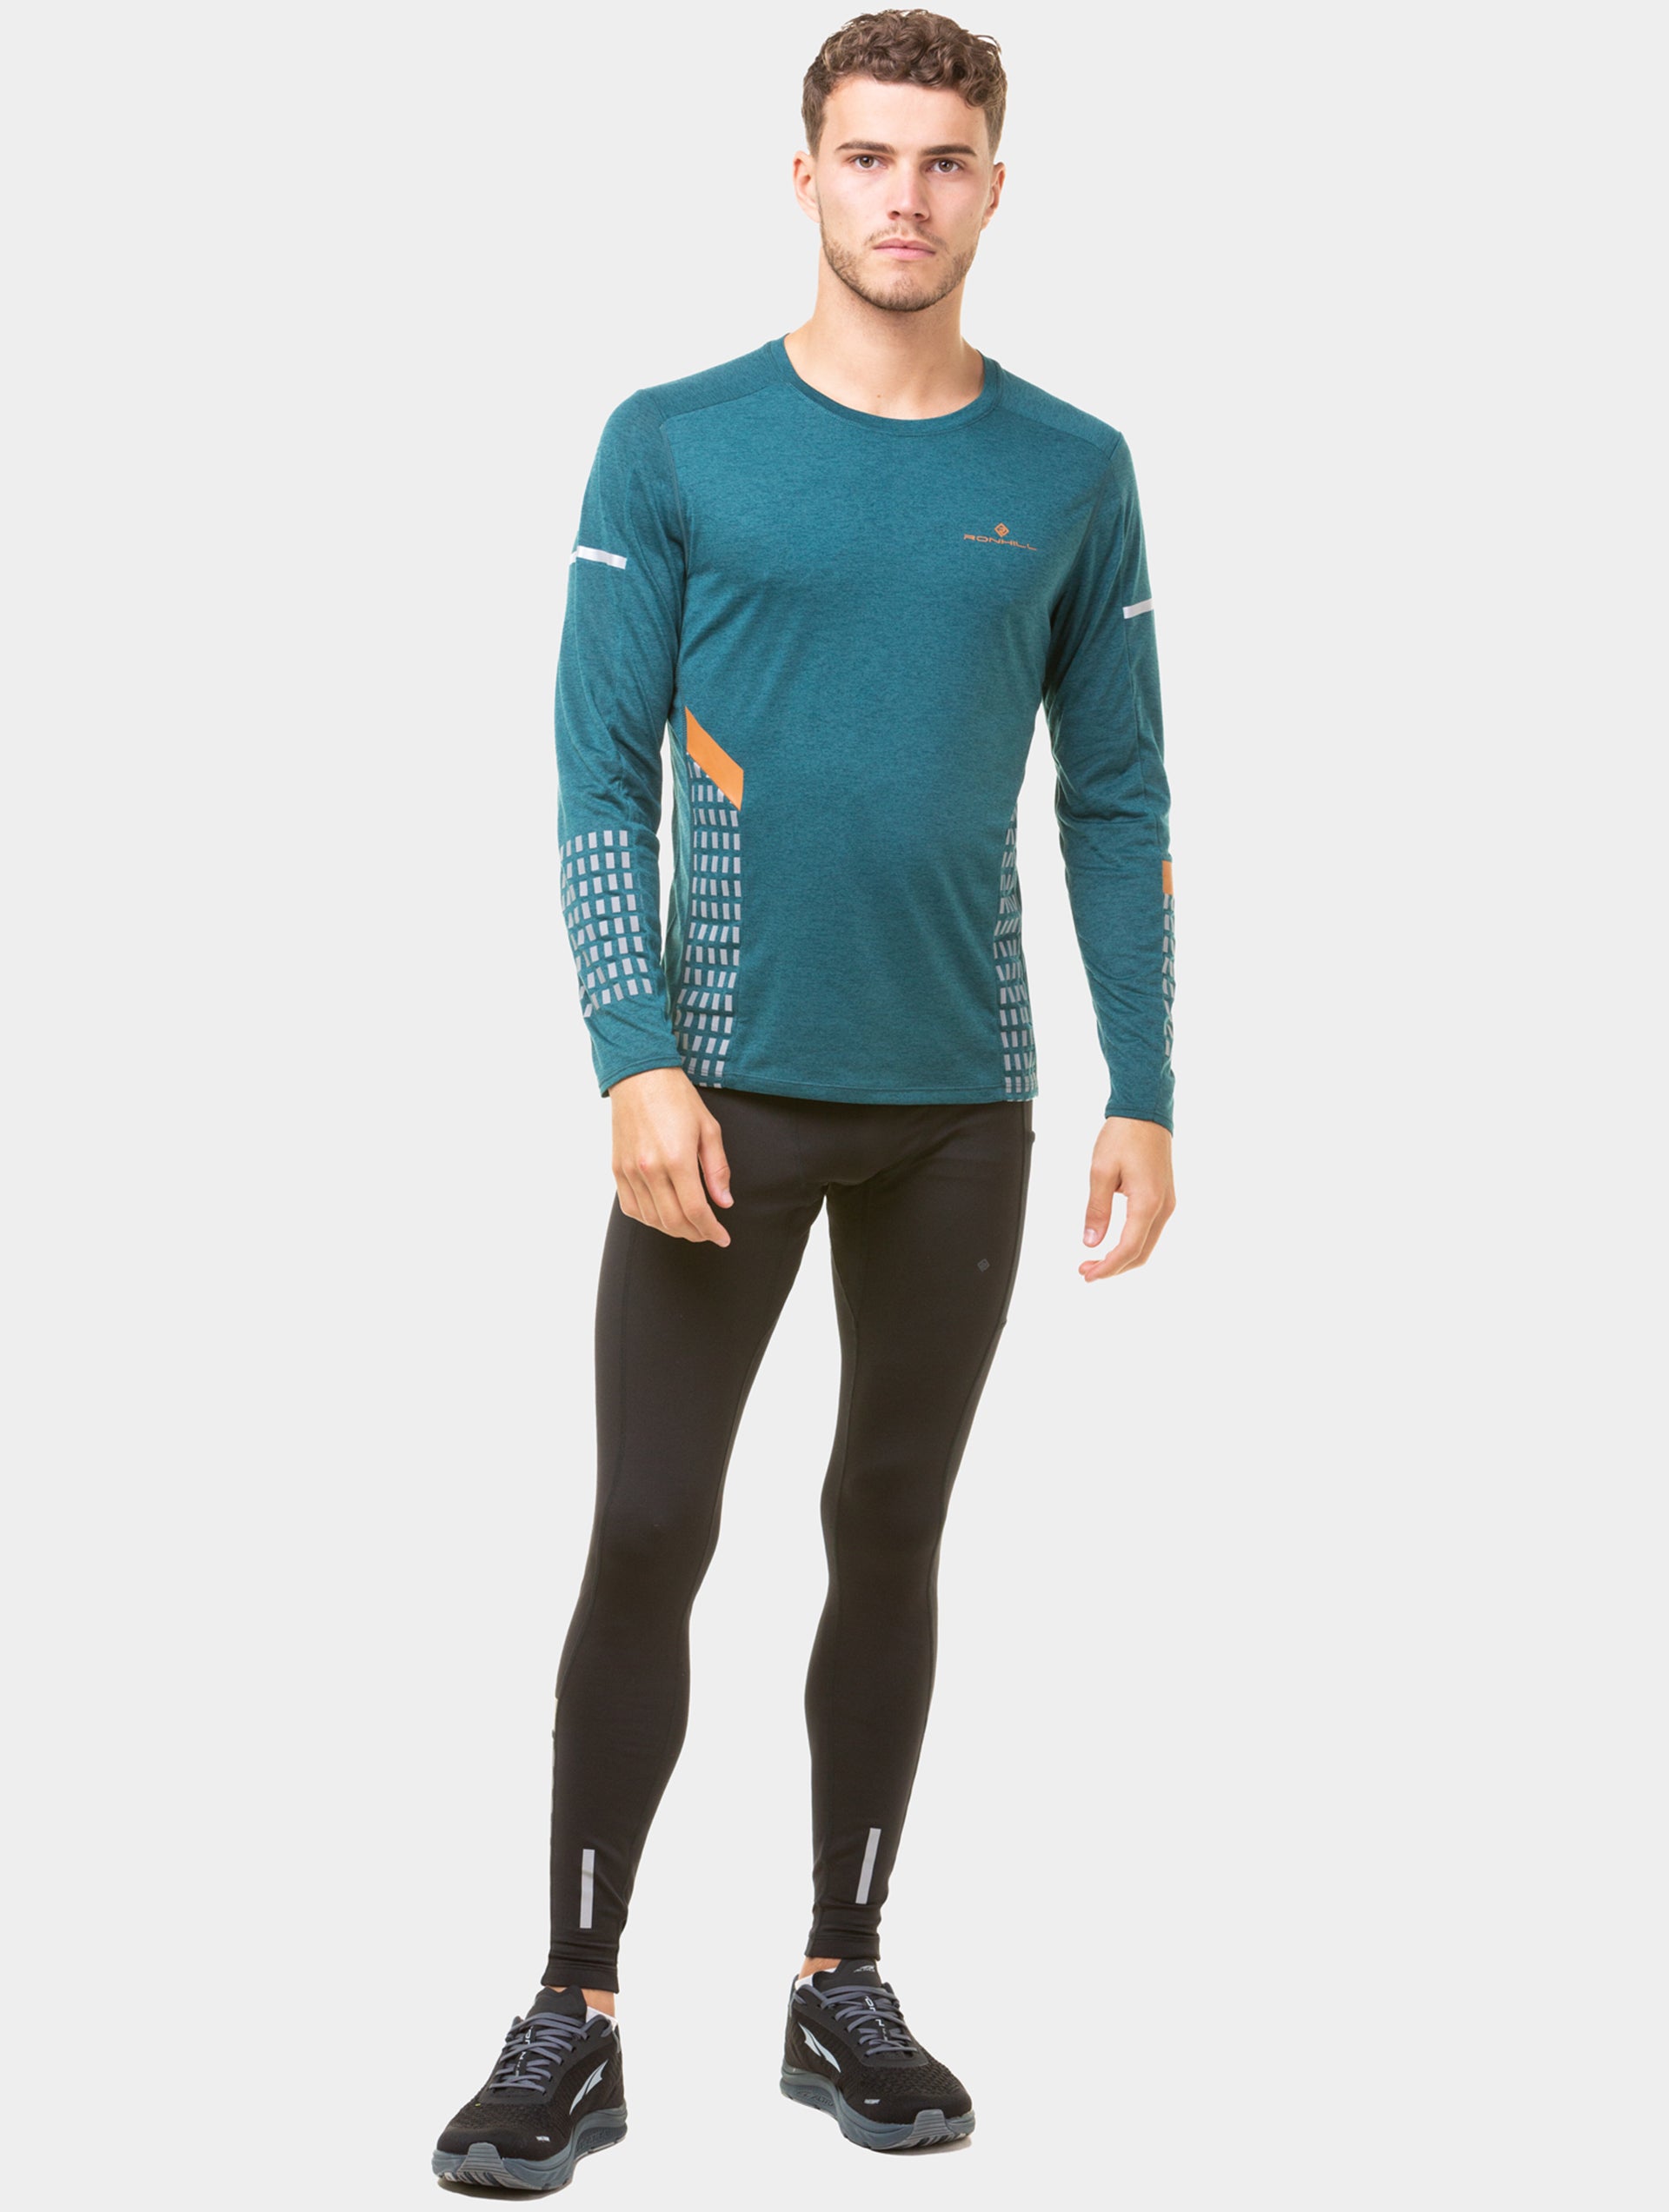 Ronhill Mens Tech Afterhours Tights (Highland/Limstone/Reflect)